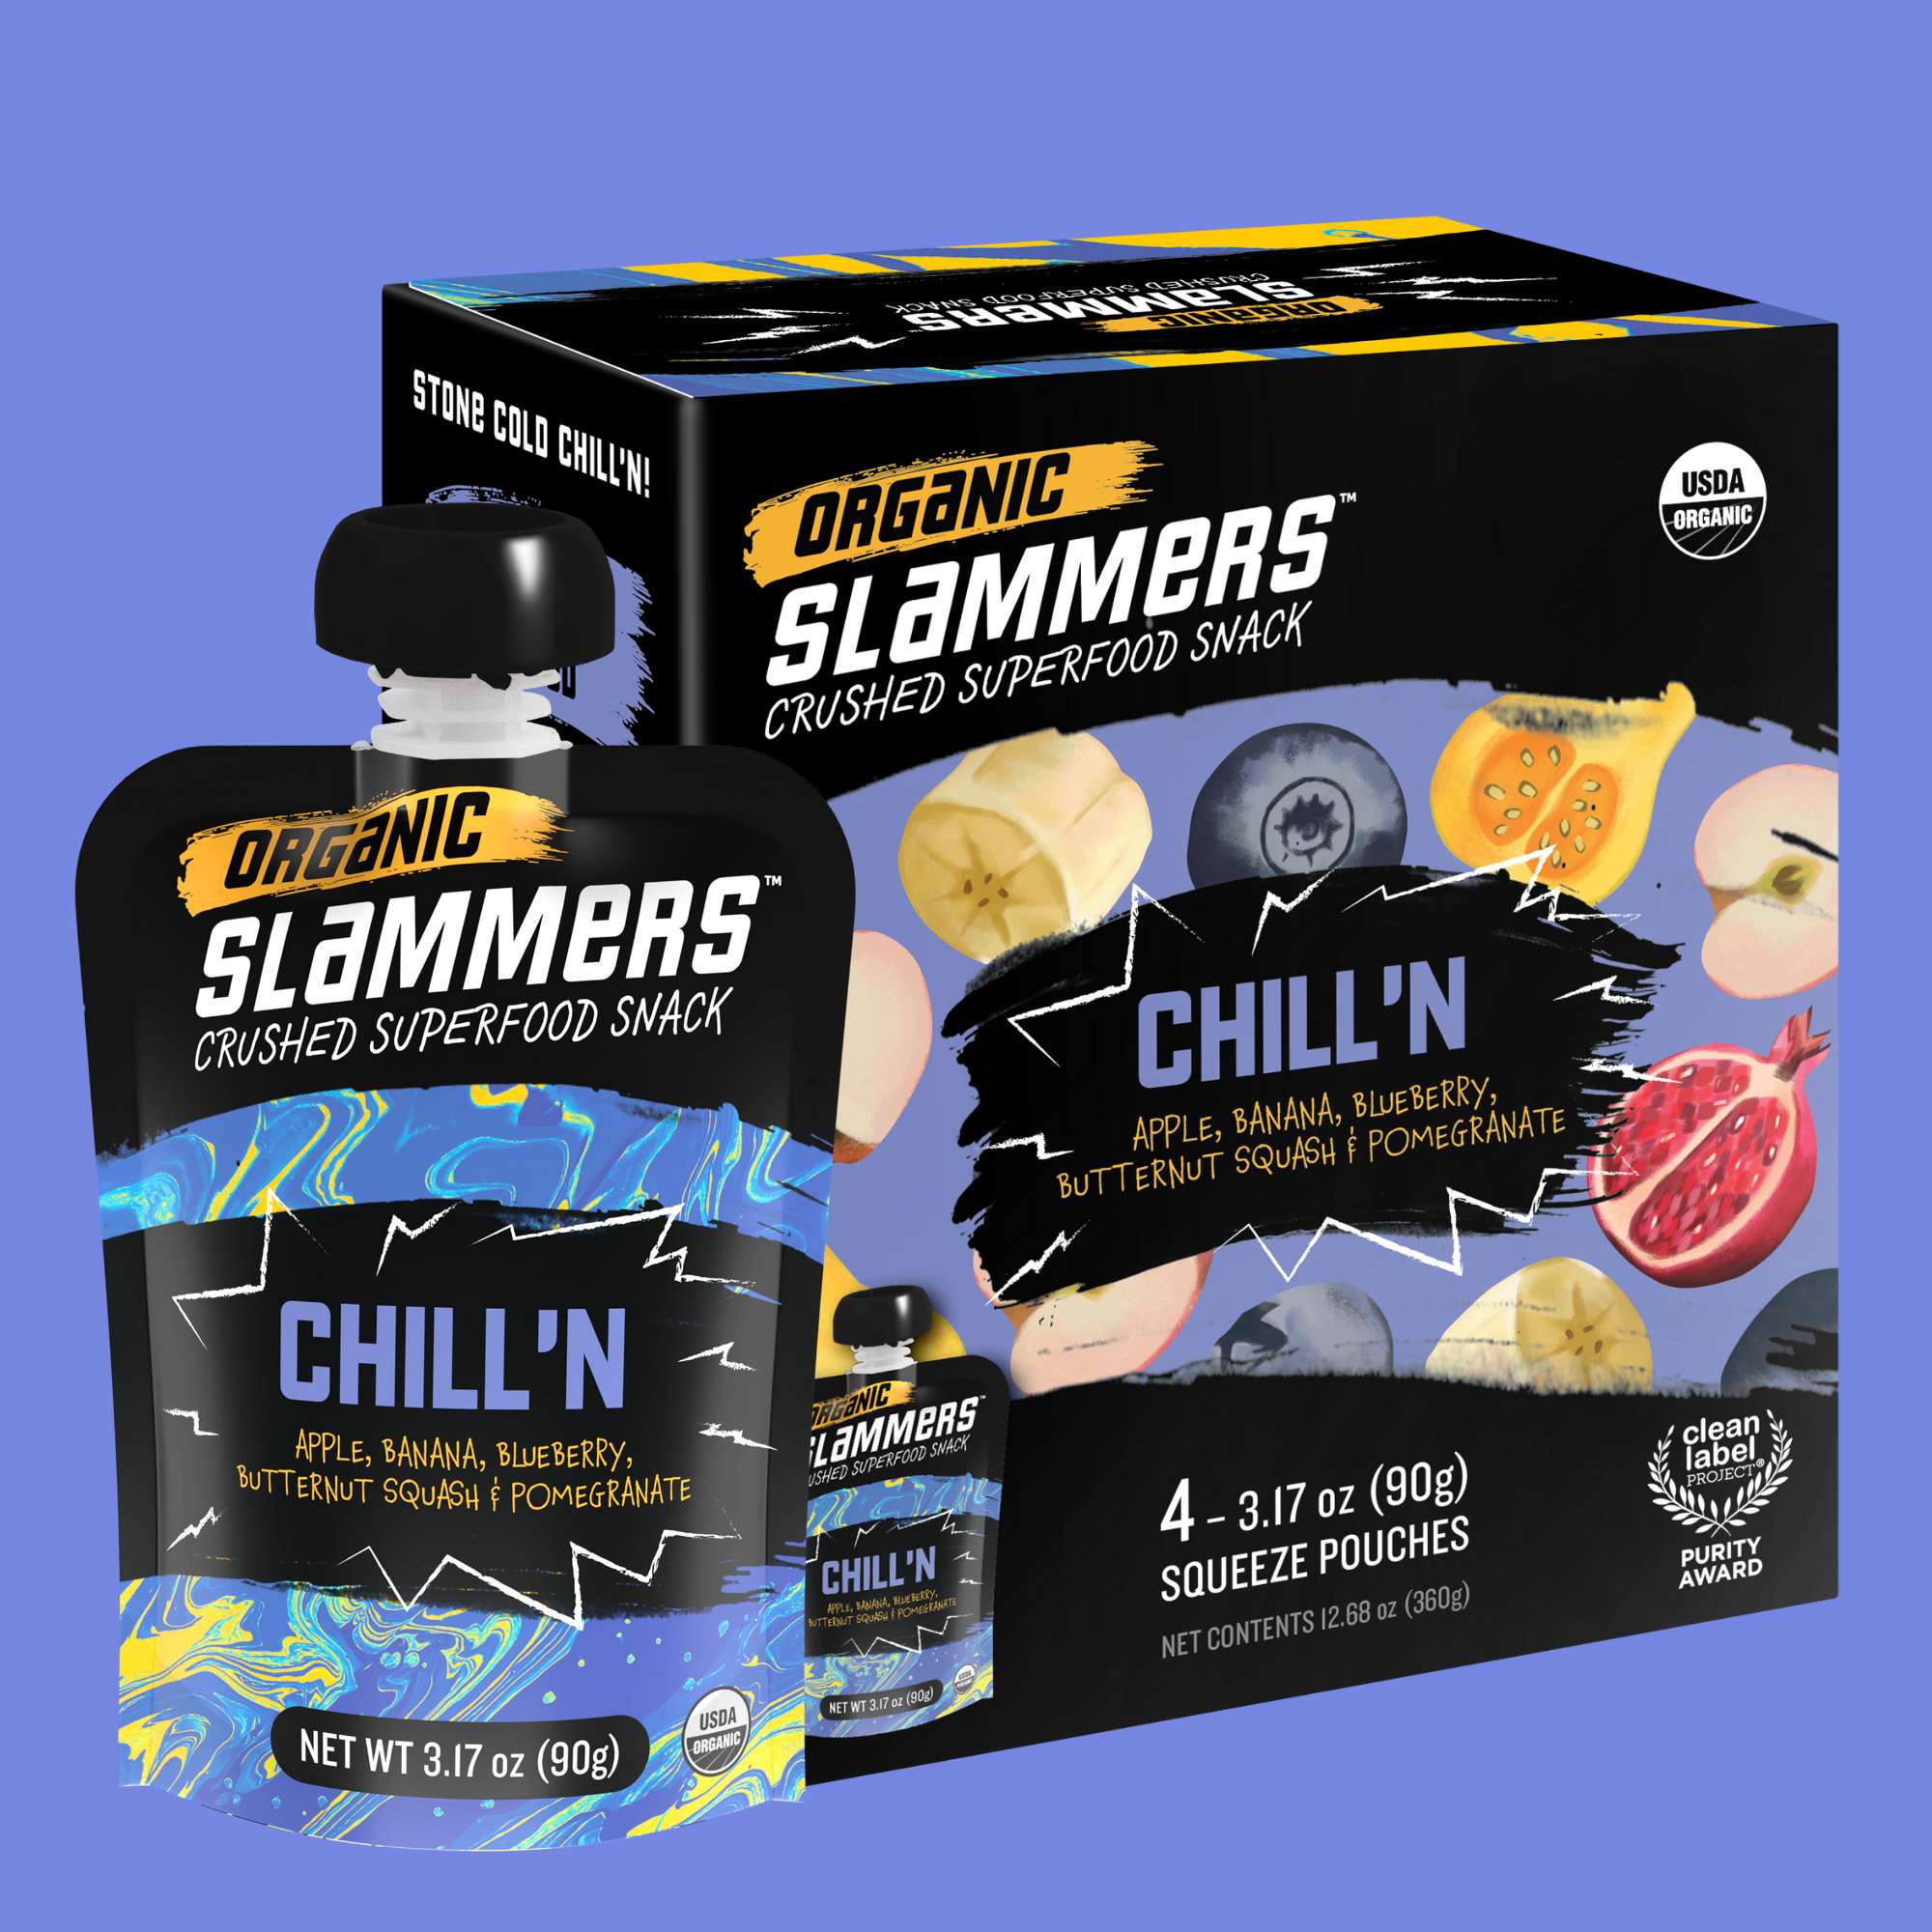 Slammers Chilln pouch and box_blue background